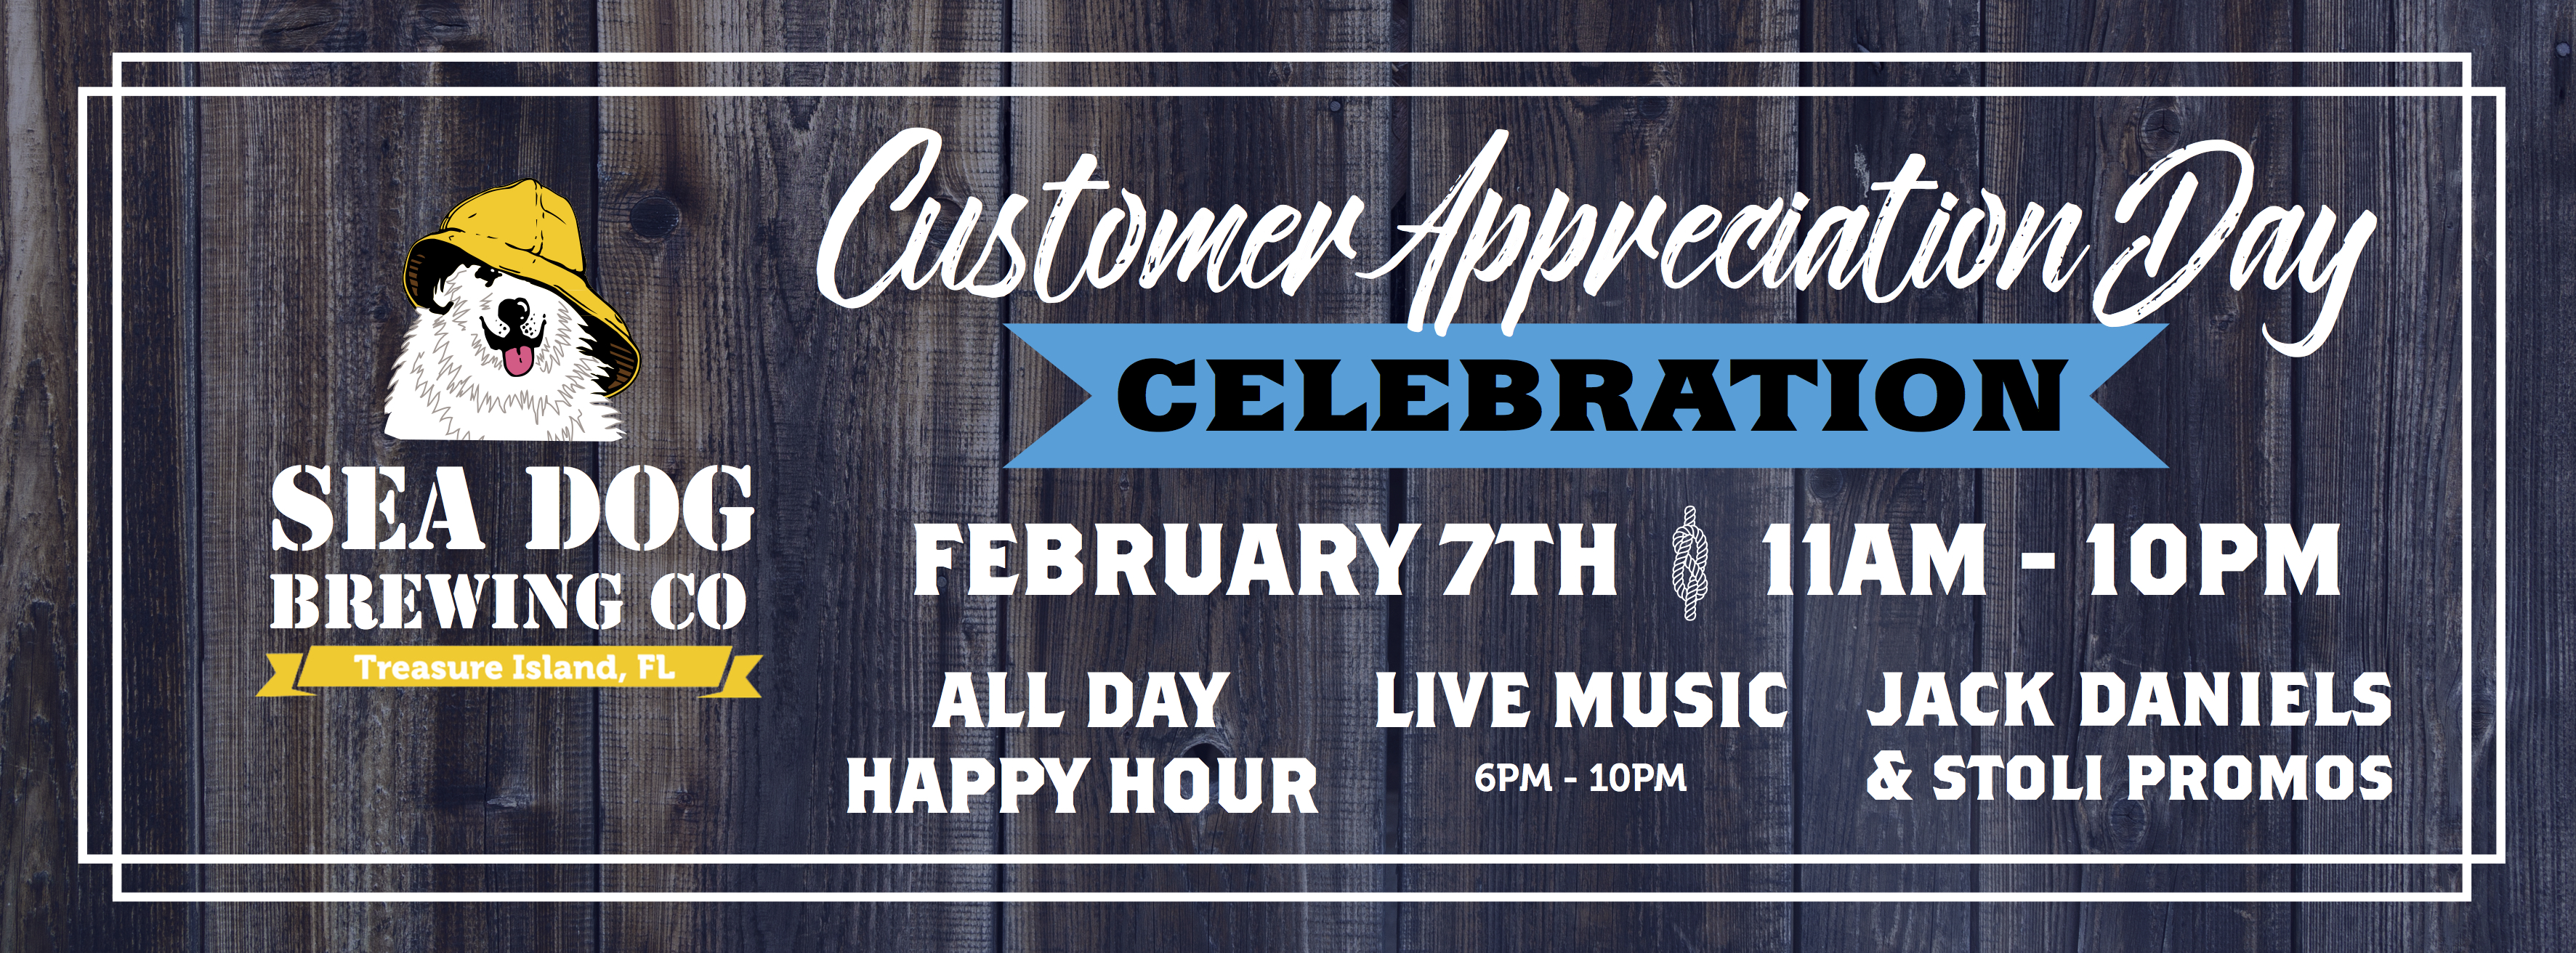 CLIENT NEWS: Sea Dog Brewing To Host Customer Appreciation Day